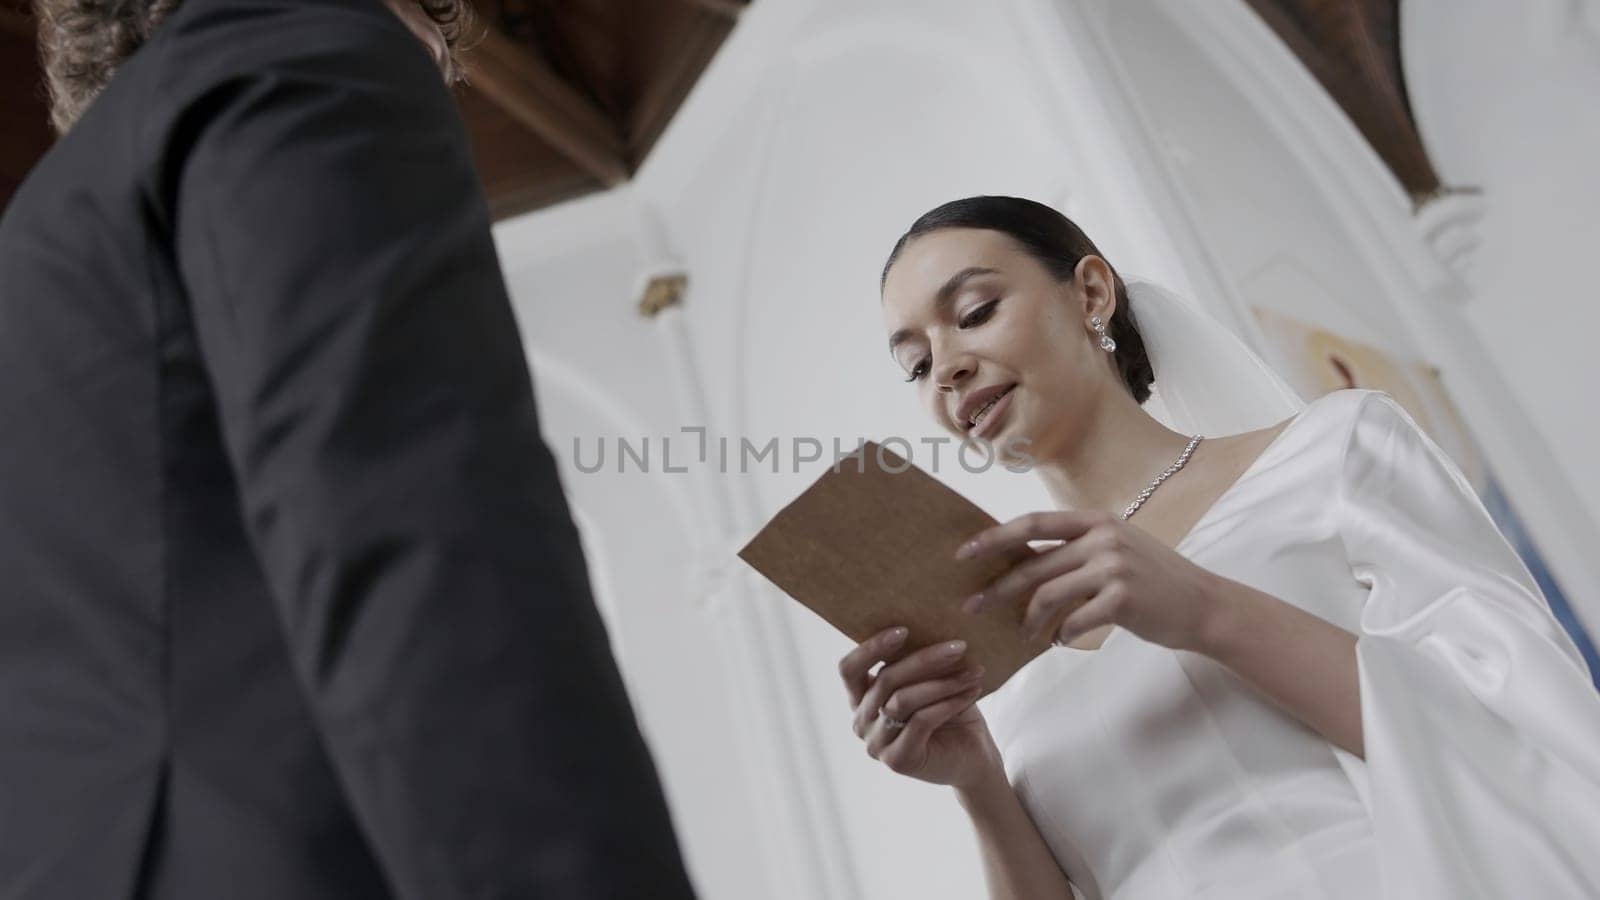 The wedding ceremony in the church. Action.Beautiful newlyweds with a bright spectacular bride in a white dress and a groom in a suit who take vows at their wedding. High quality 4k footage